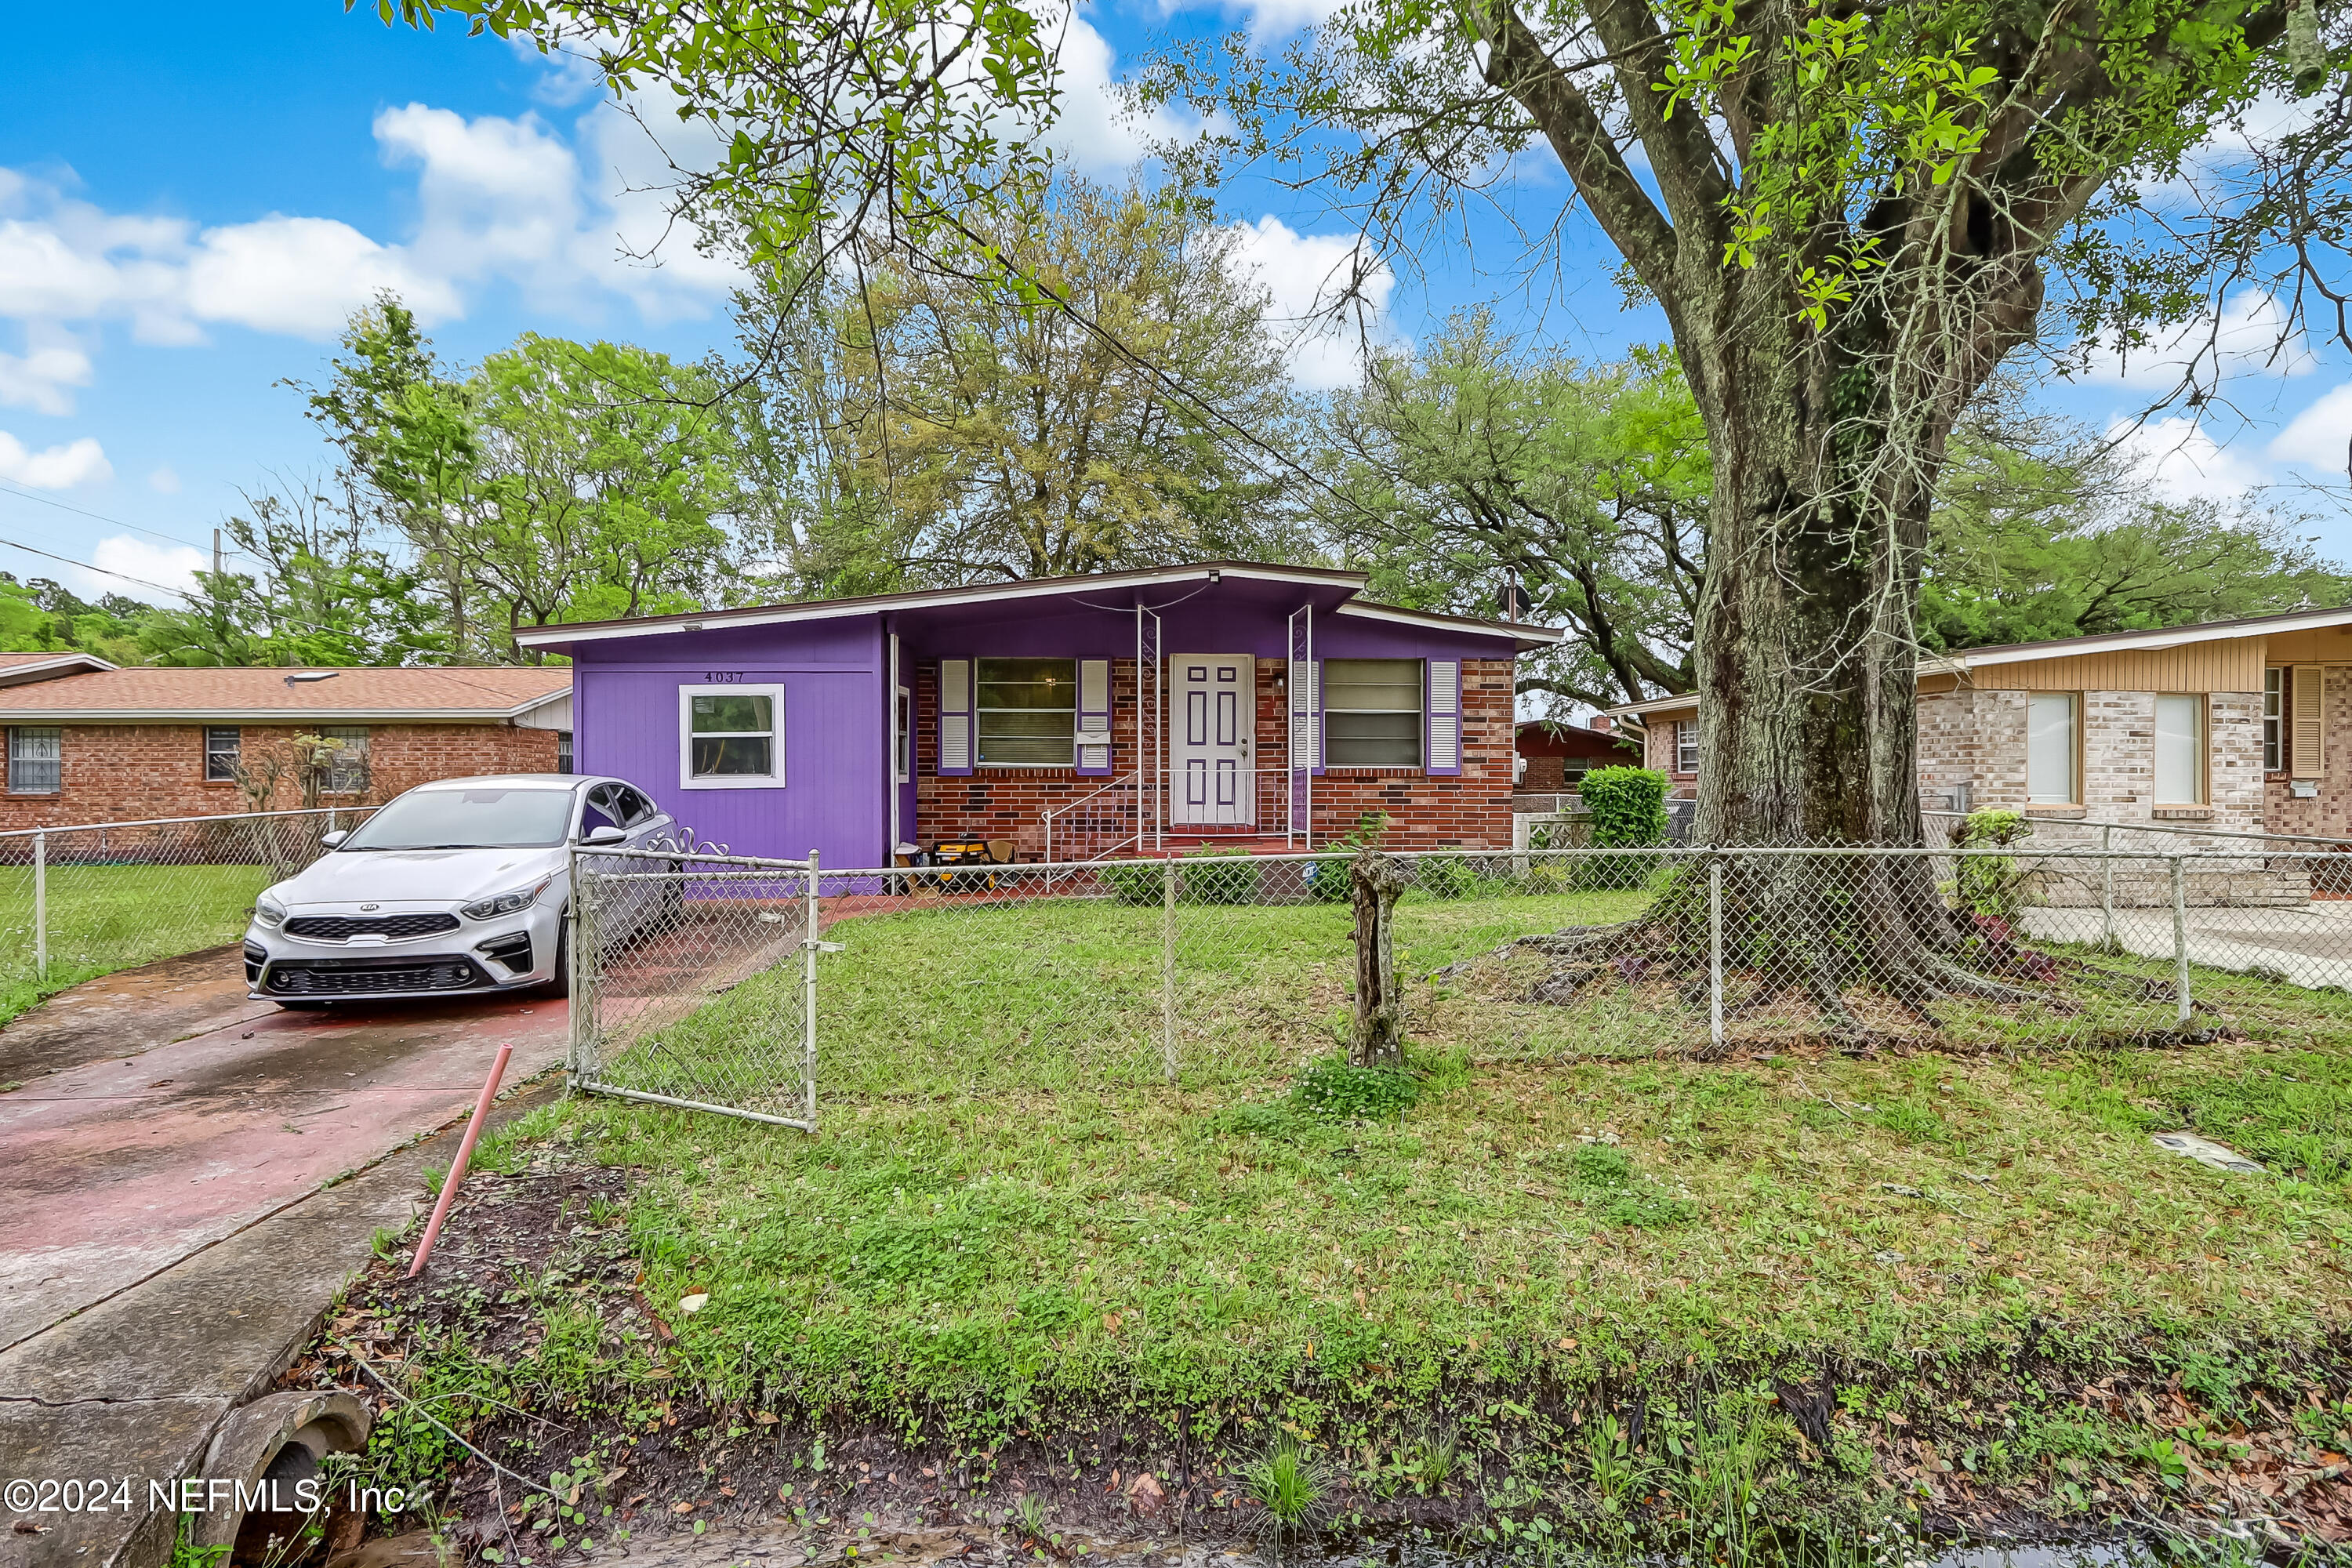 Jacksonville, FL home for sale located at 4037 MARLAND Street, Jacksonville, FL 32209